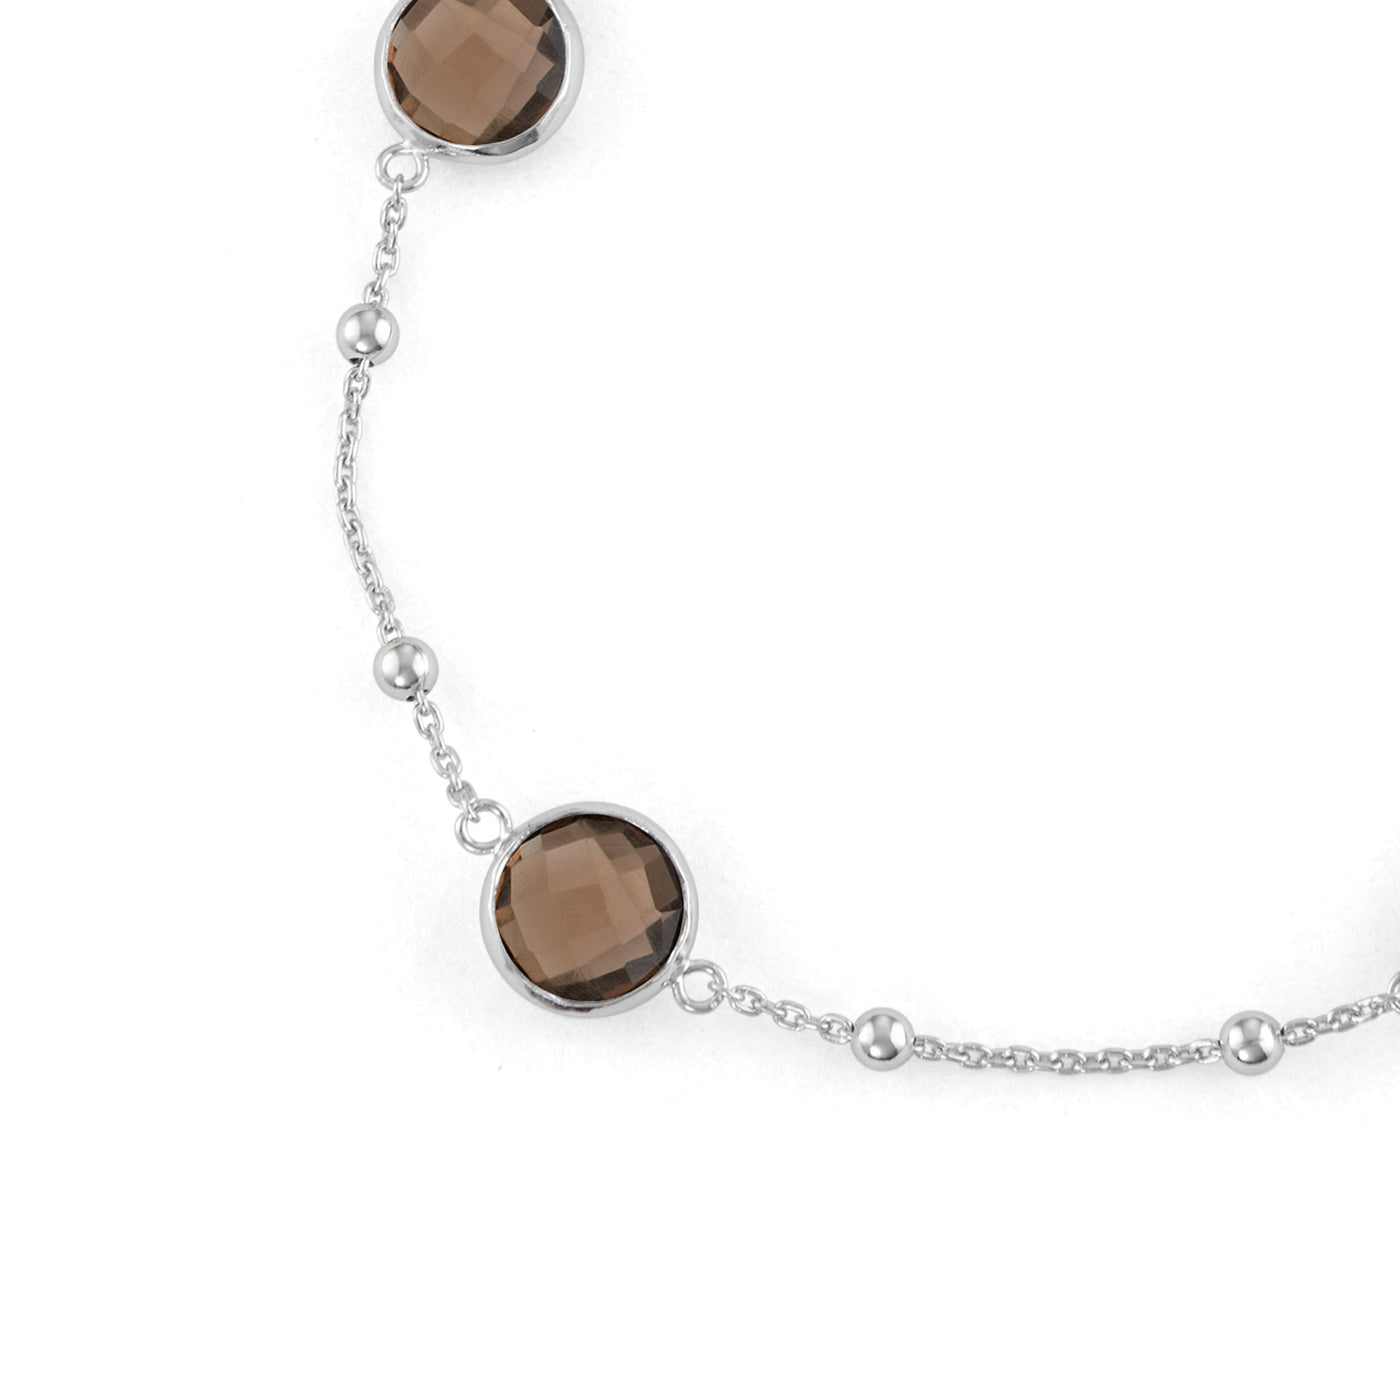 Sterling Silver Bezel Bracelet With Small Silver Stations And Smoky Quartz Round Gemstones